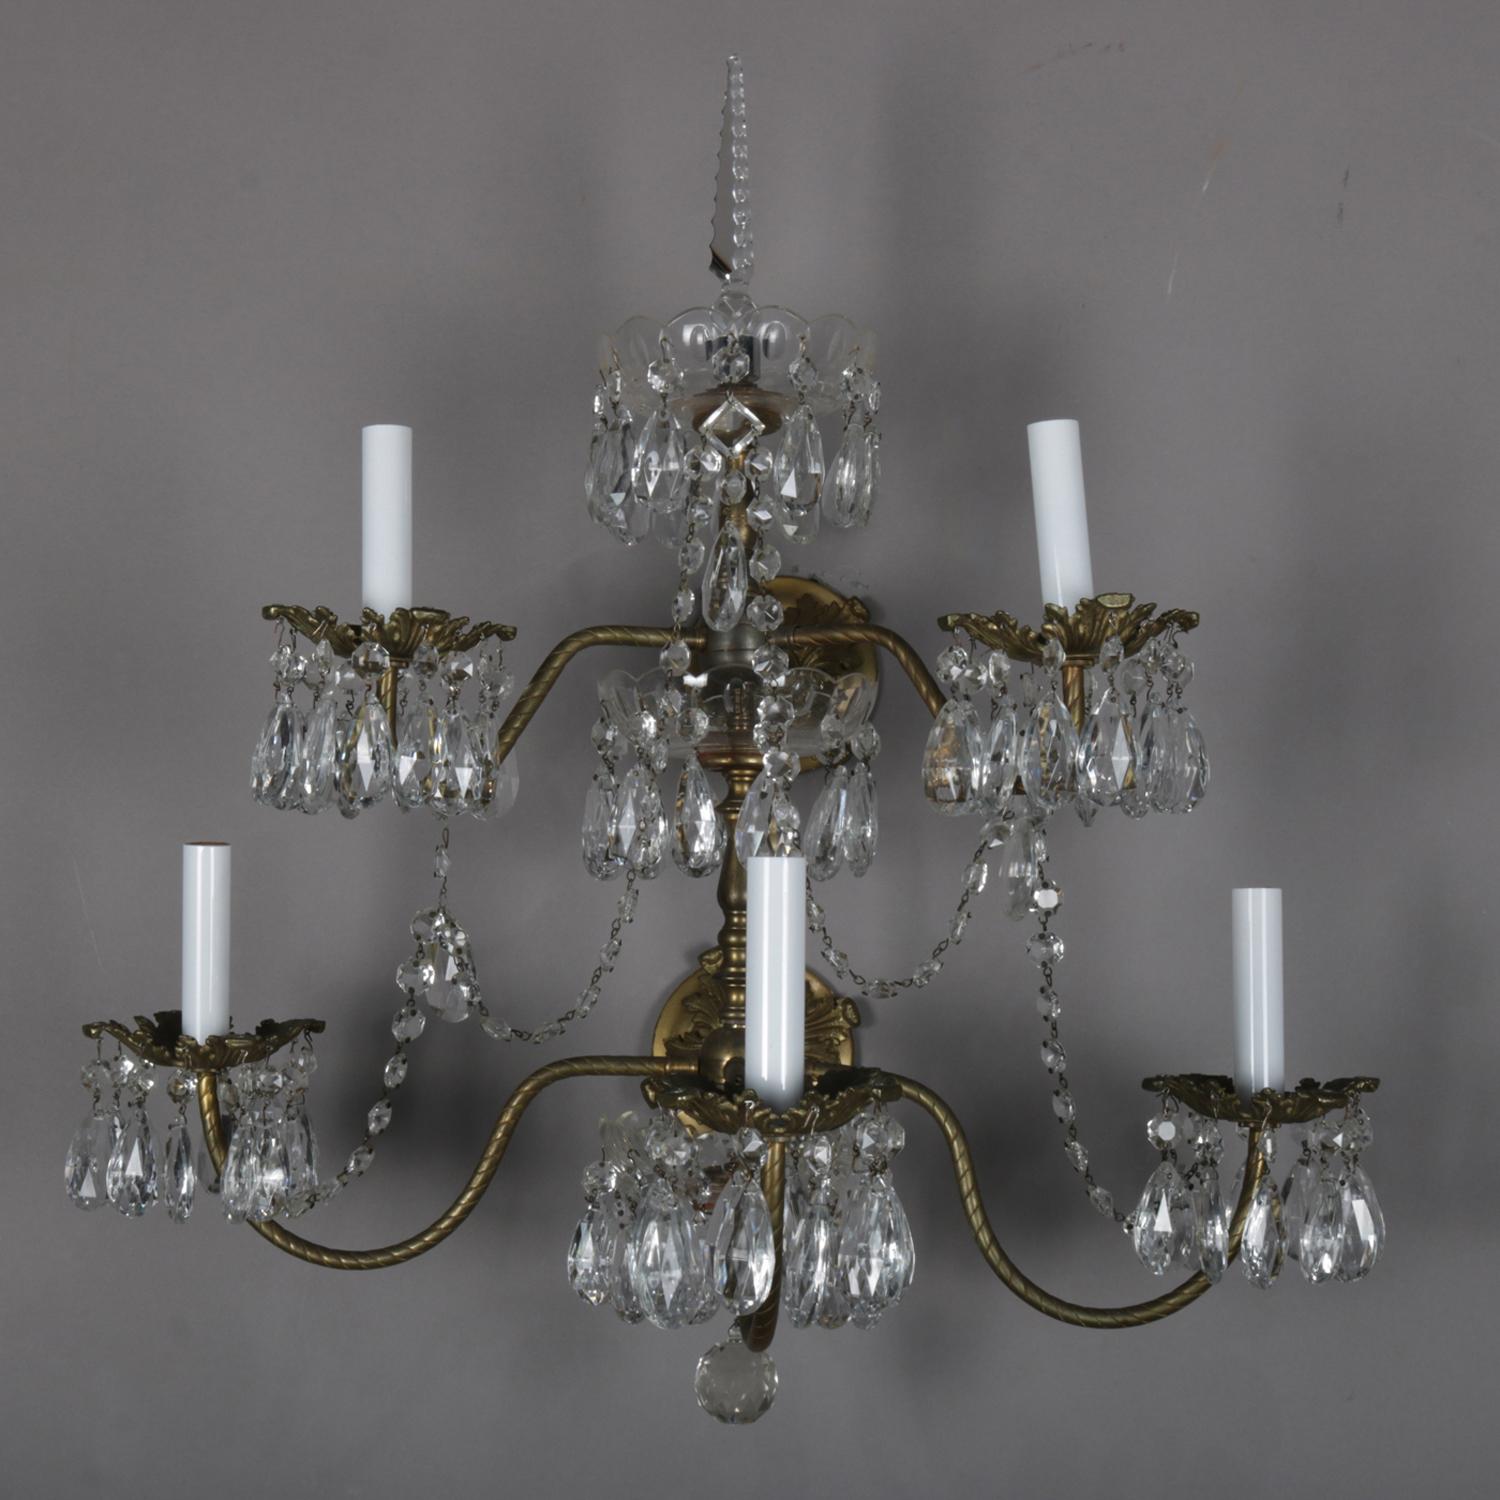 Victorian Pair of French Branch Chandelier Rock Crystal Electric Candle Light Wall Sconces